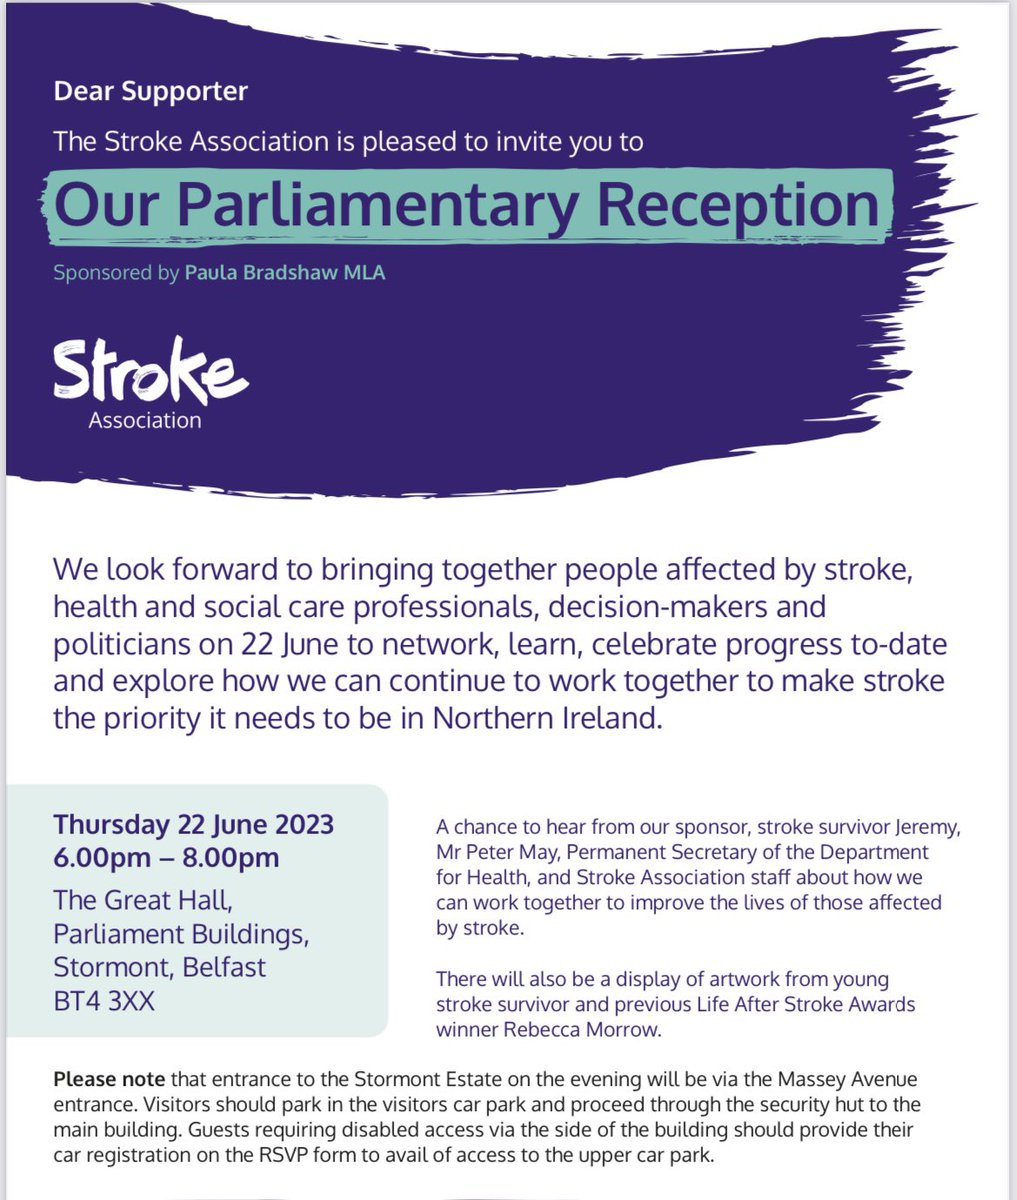 Looking fwd to @strokeassocni Parliamentary Reception at Stormont tonight to share my experience of stroke. Thank you to @PaulaJaneB for sponsoring this event & allowing everyone to come together to help push stroke care up the agenda